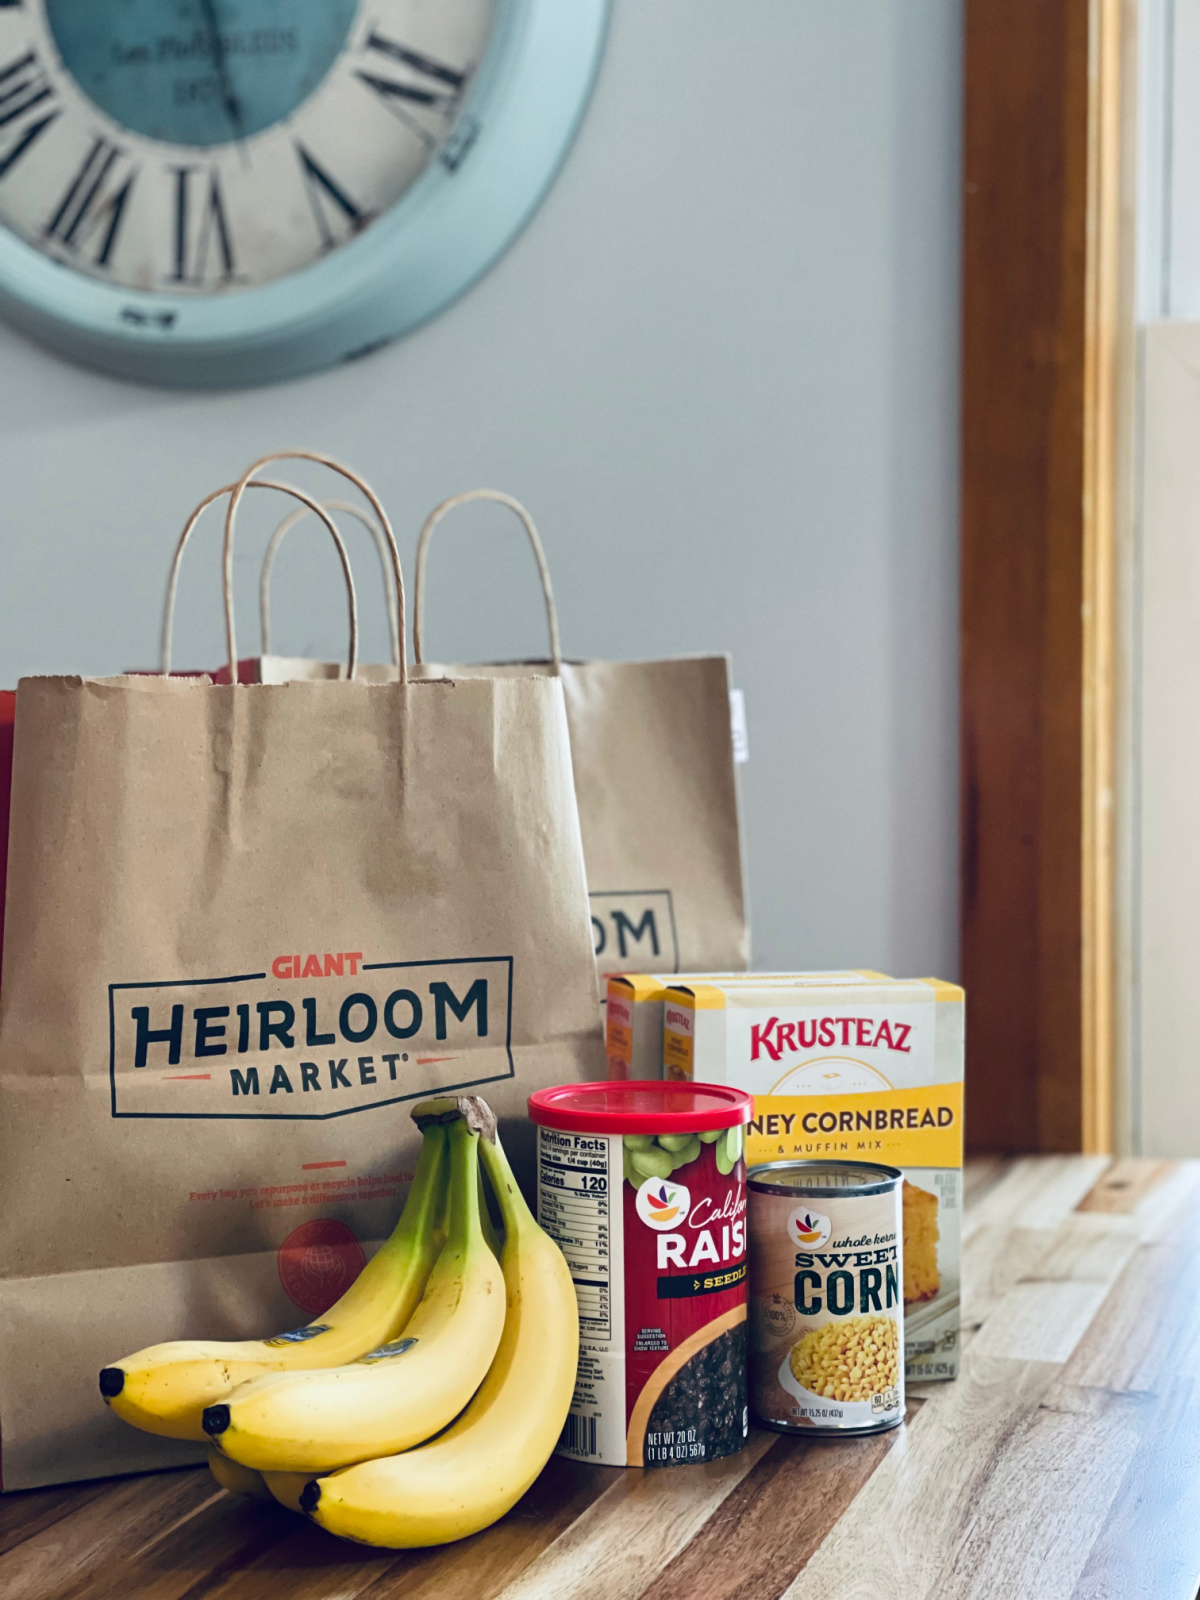 Giant grocery bags and grocery items sitting on kitchen table with clock in background